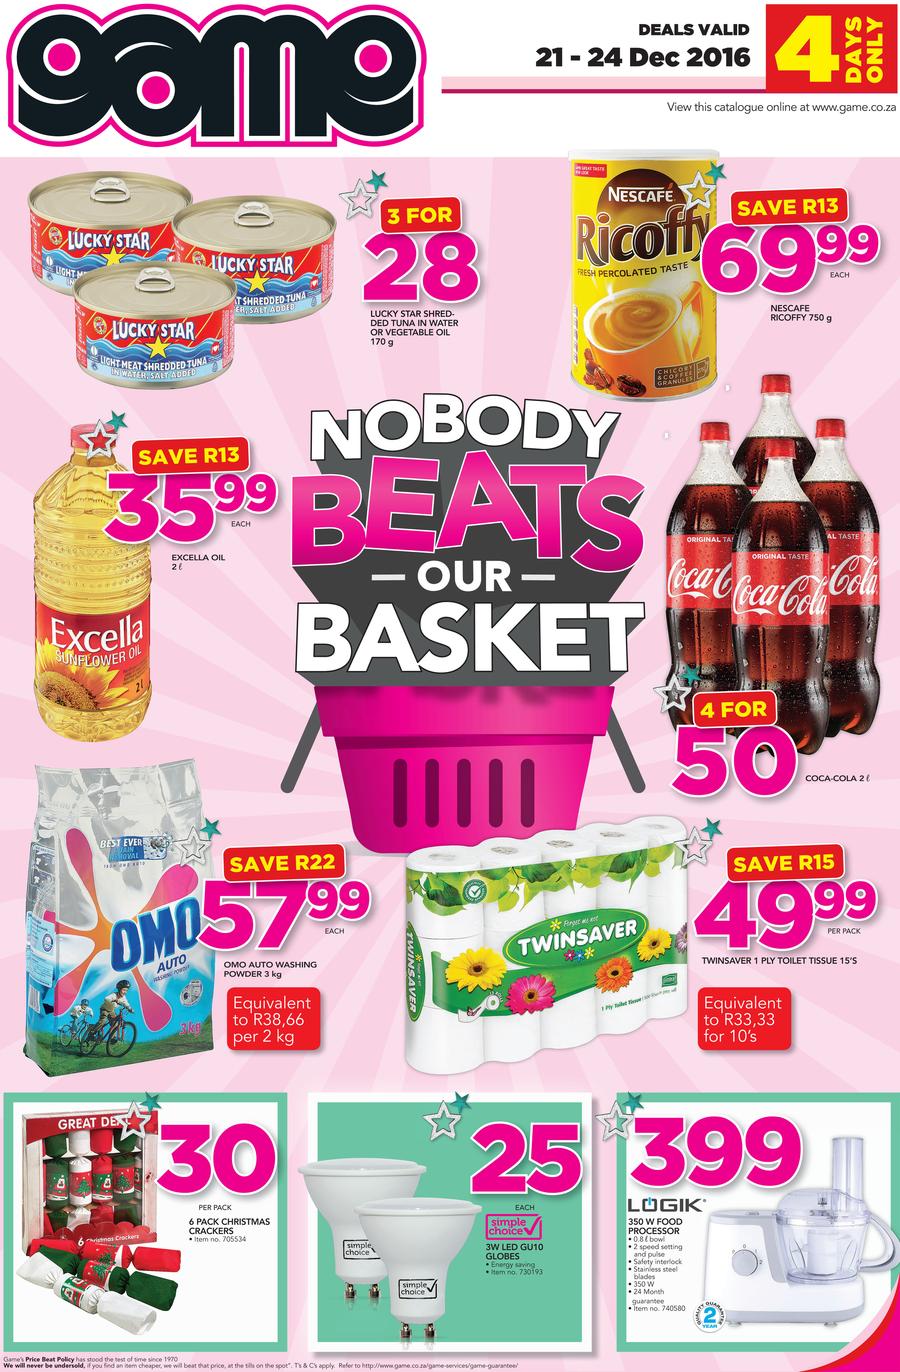 Game JHB : Nobody Beats Our Basket